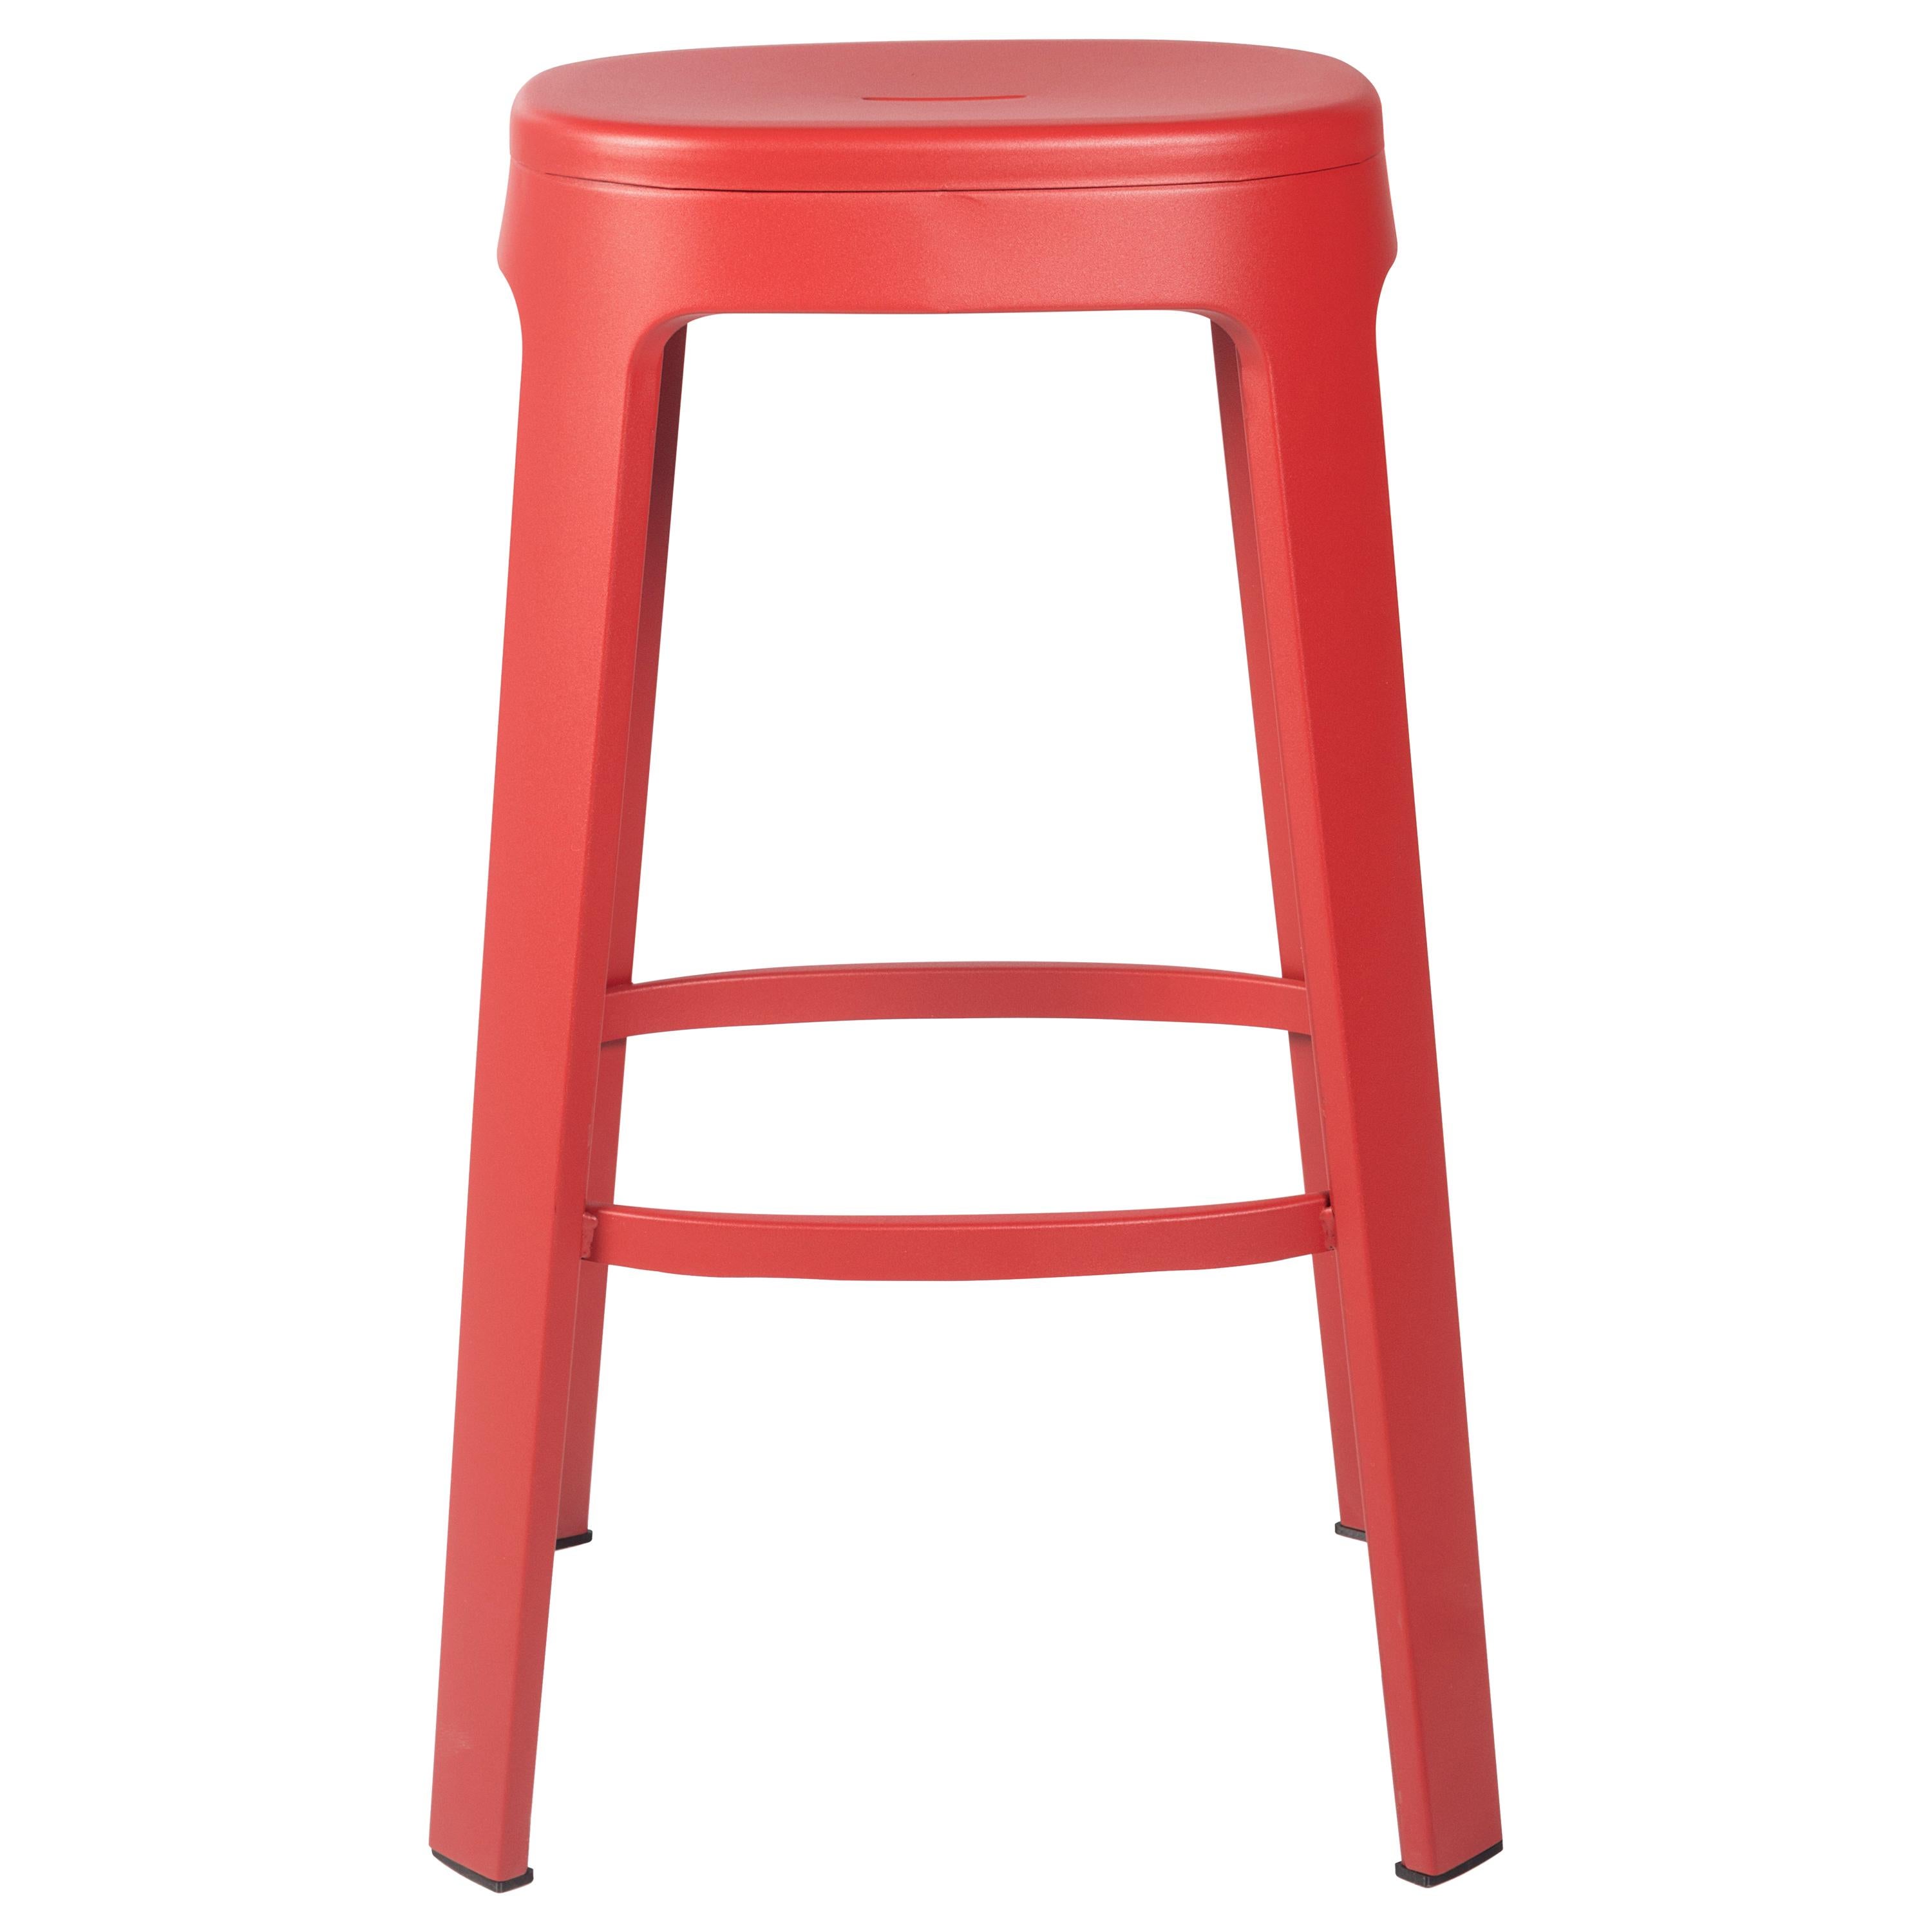 Ombra Bar Stool, Red by Emiliana Design Studio For Sale